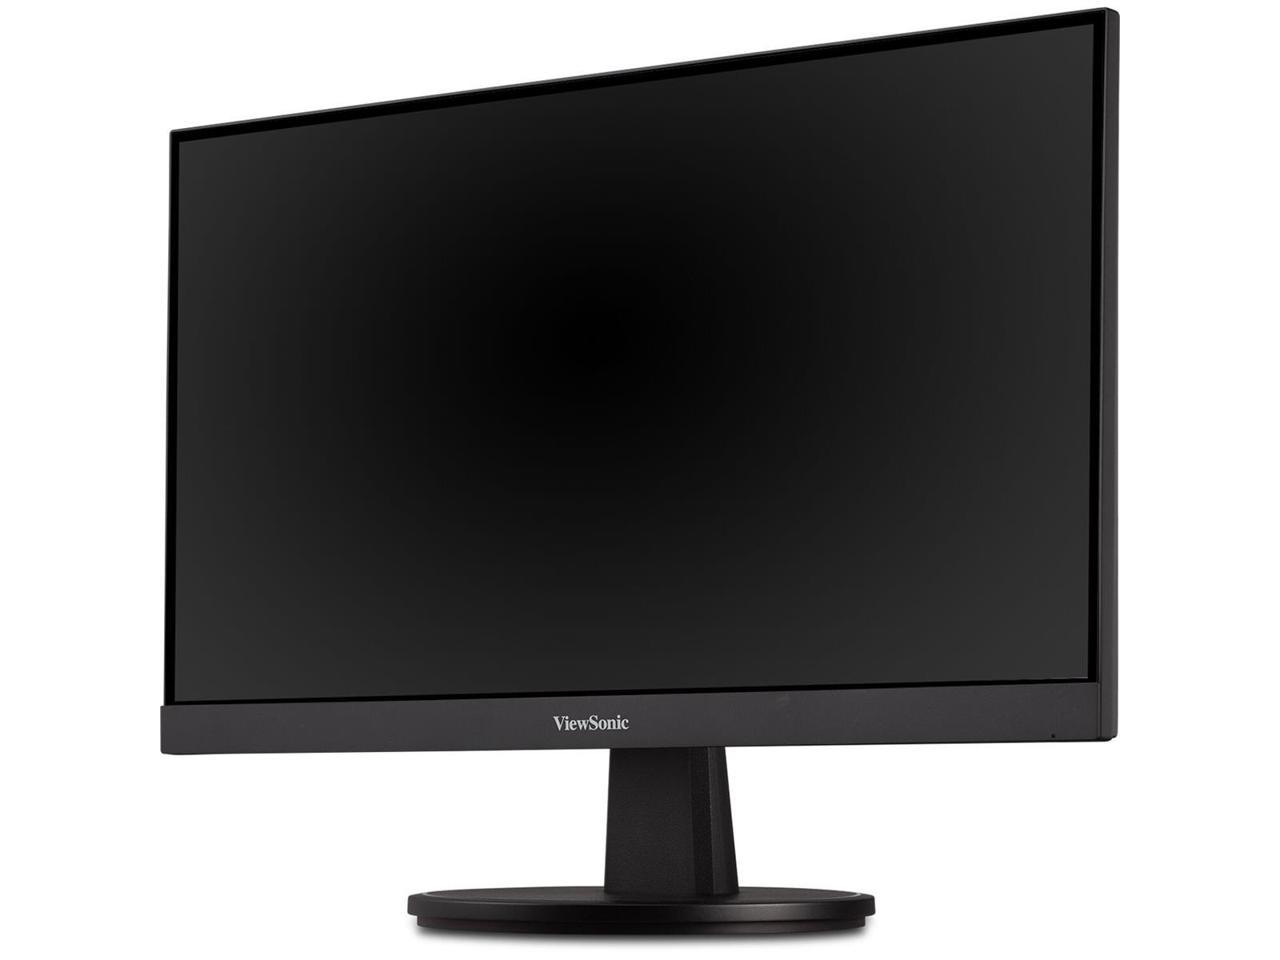 ViewSonic VA2247-MH 22 Inch Full HD 1080p Monitor with Ultra-Thin Bezel, Adaptive Sync, 75 Hz, Eye Care, HDMI, VGA Inputs for Home and Office